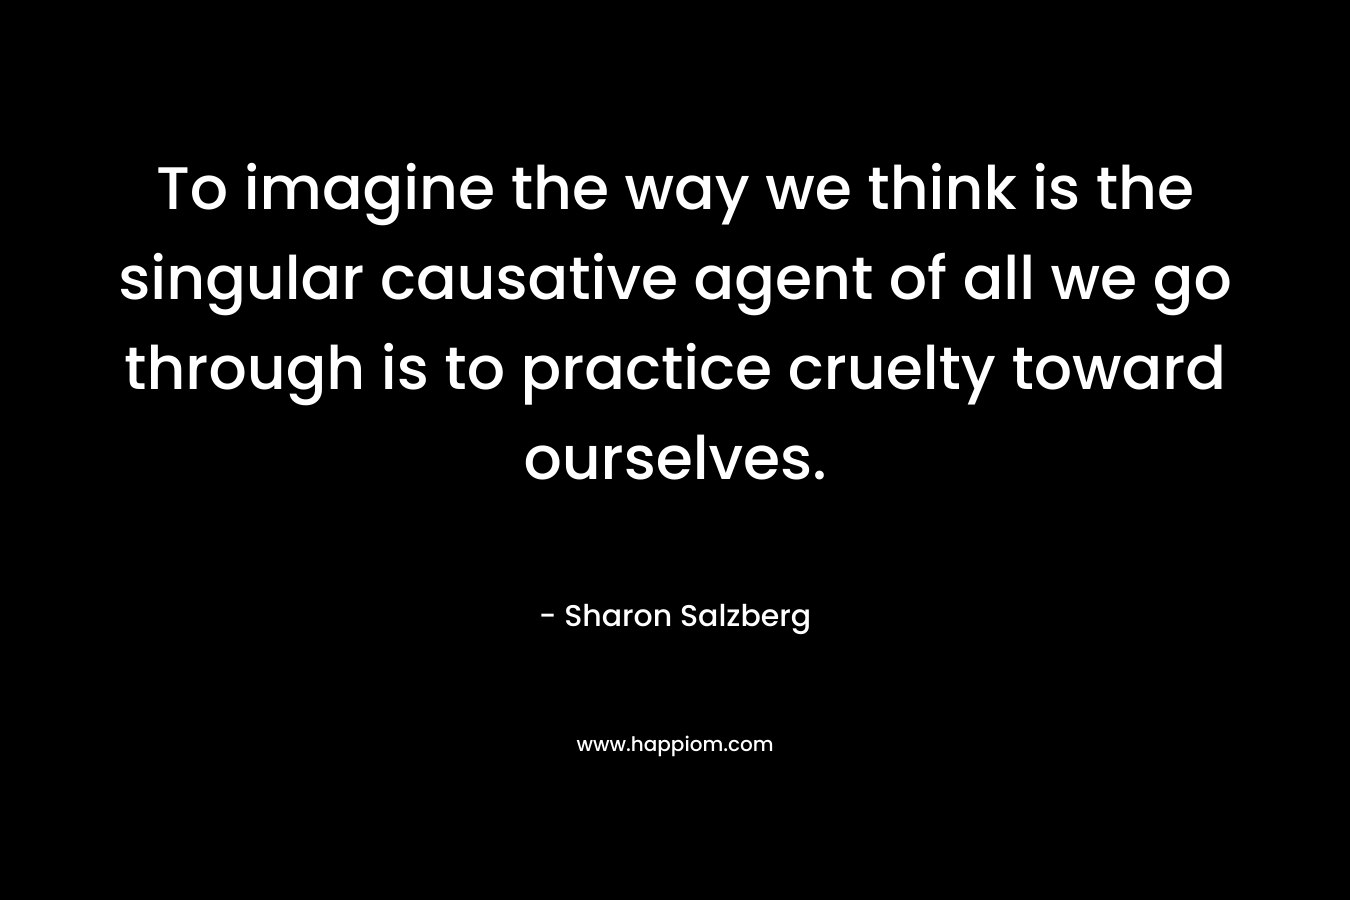 To imagine the way we think is the singular causative agent of all we go through is to practice cruelty toward ourselves.